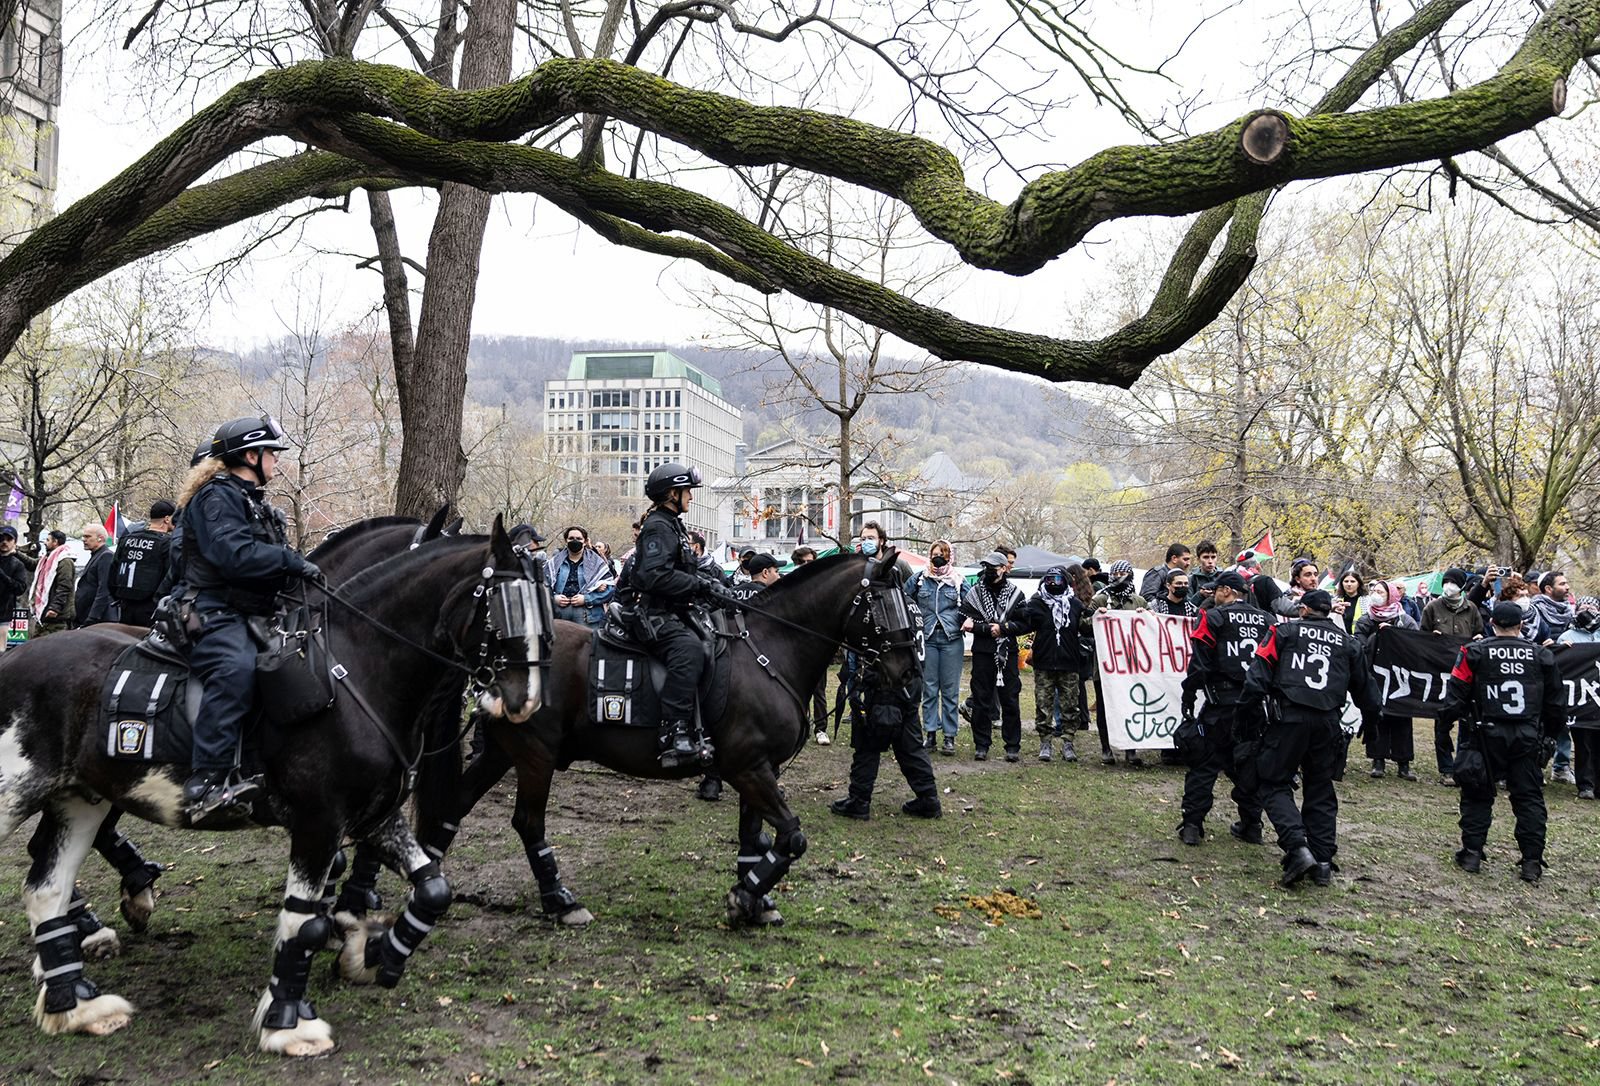 Mounted police officers walk past as pro-Palestinian activists at an encampment set up on McGill University's campus in Montreal, on May 2.